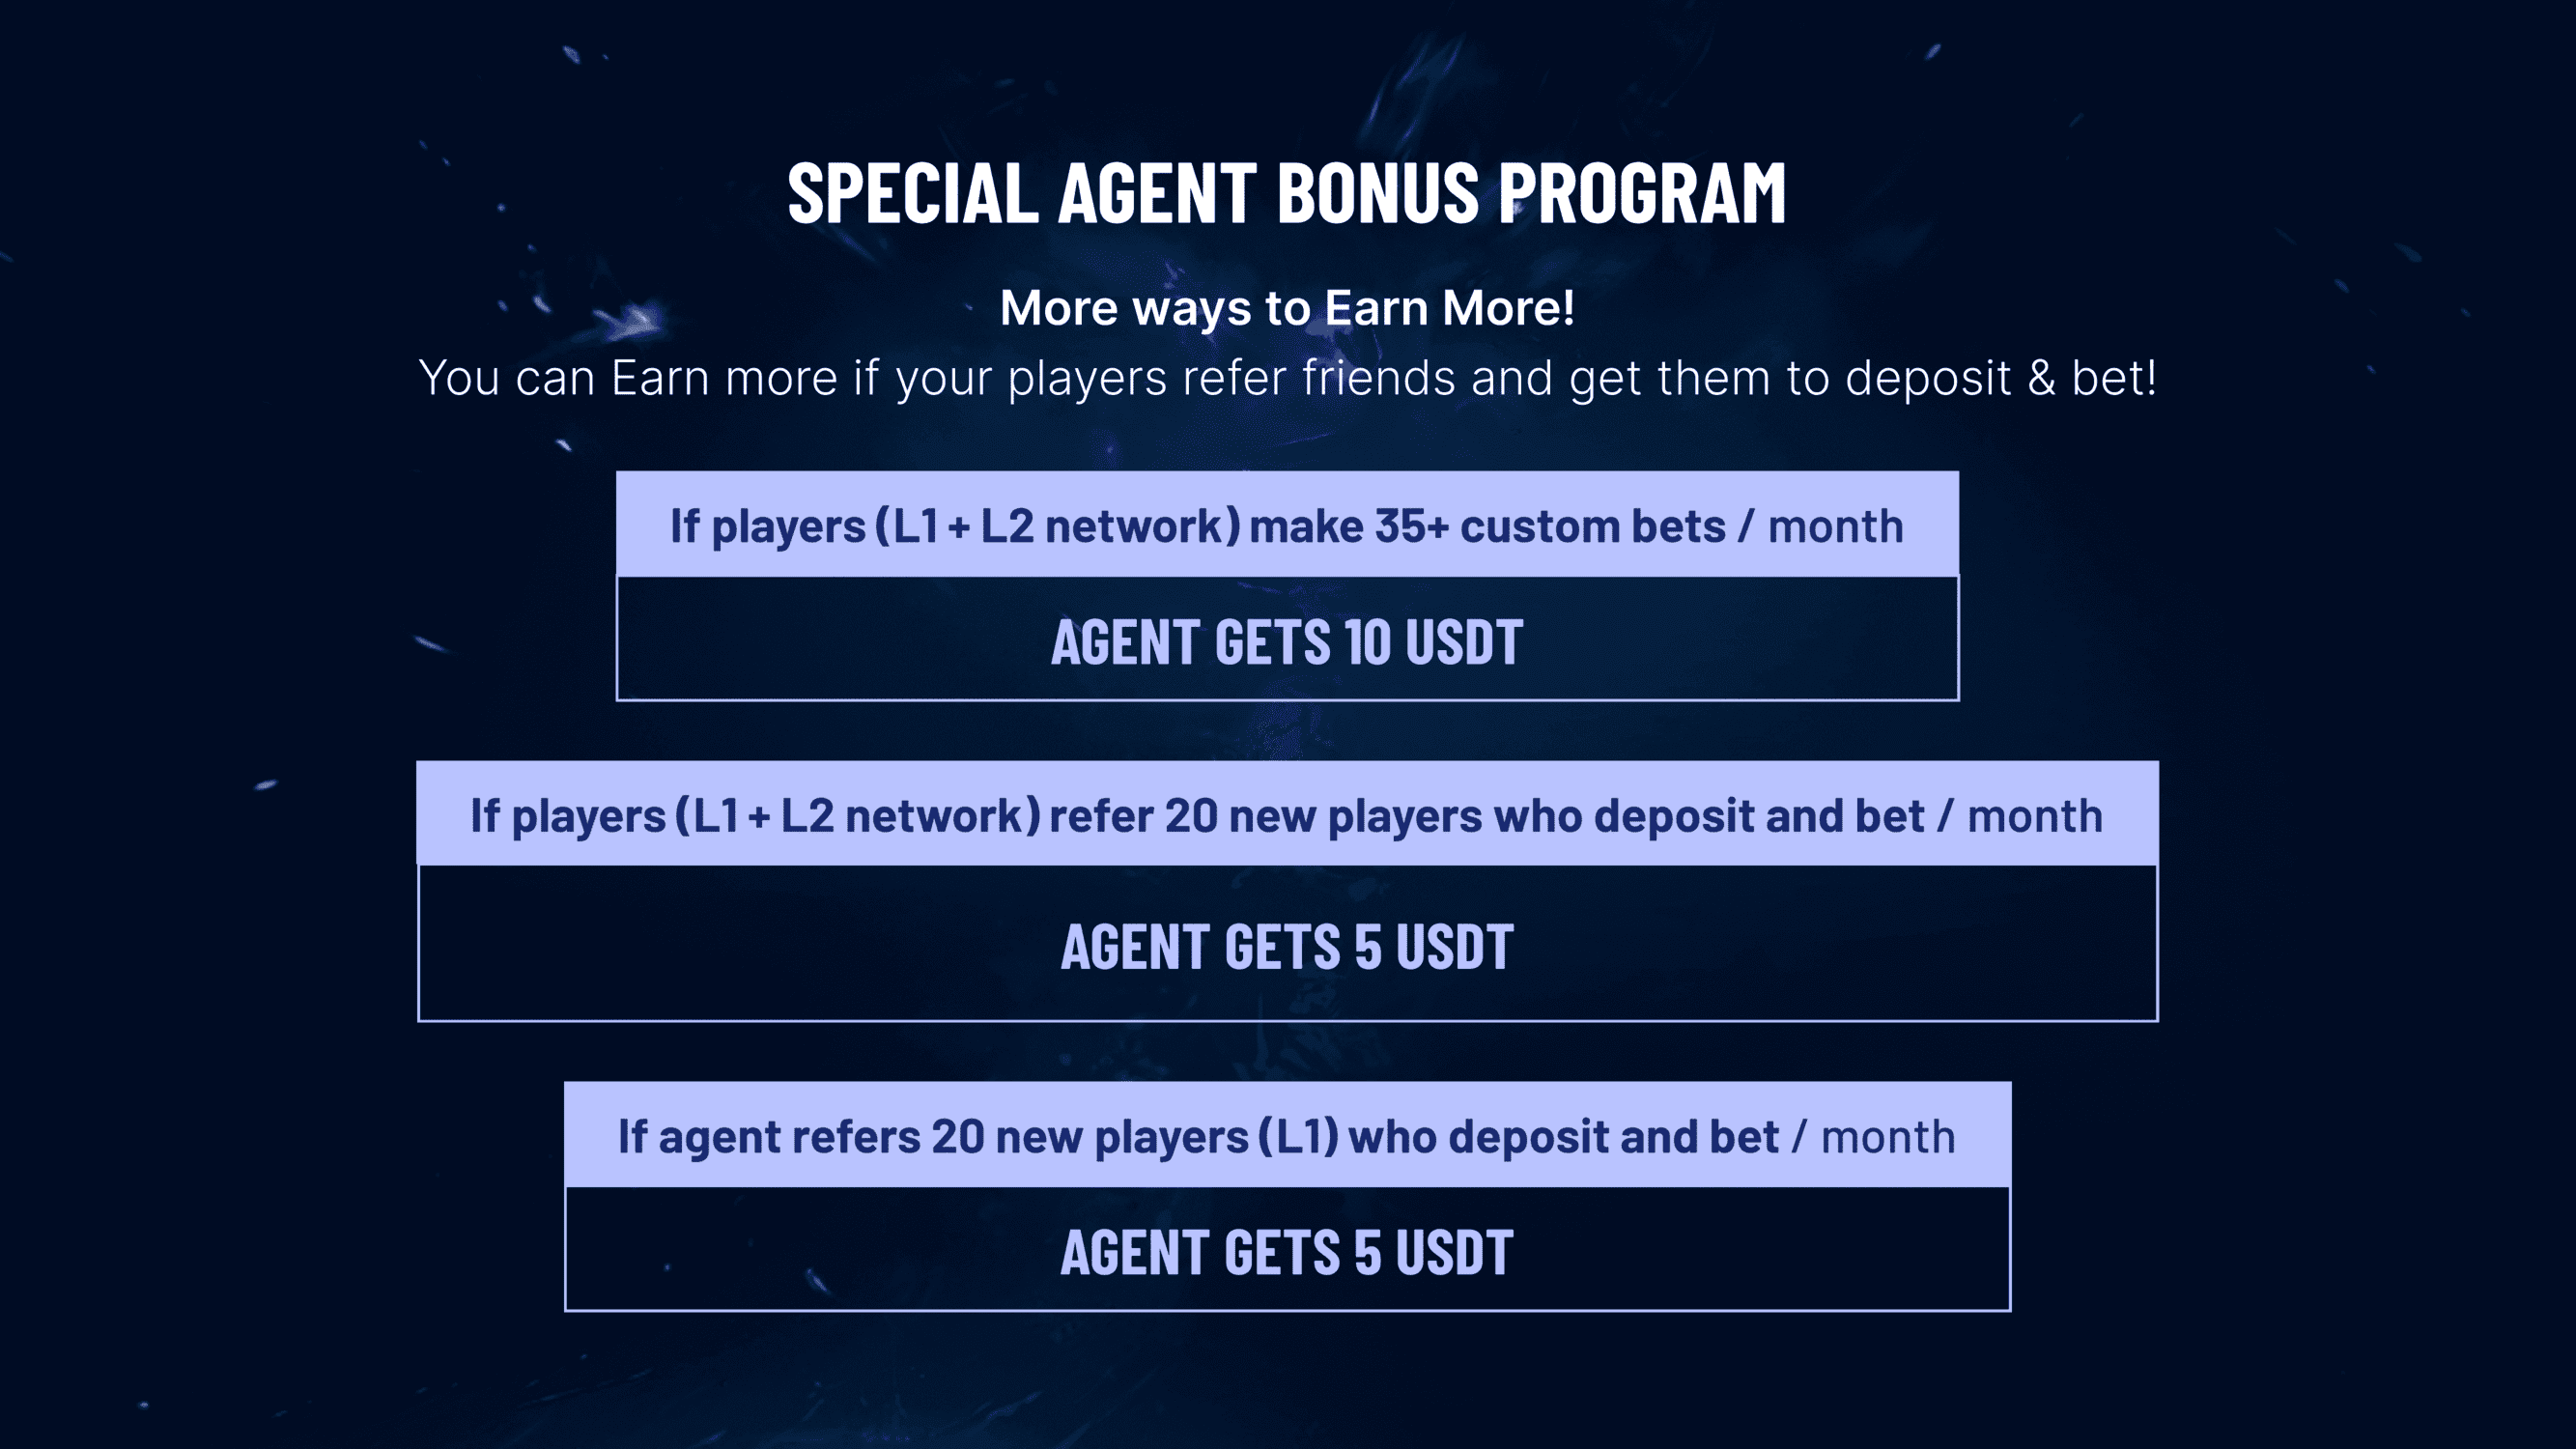 SPECIAL AGENT BONUS PROGRAM More ways to Earn More! You can Earn more if your players refer friends and get them to deposit & bet! If players (L1 + L2 network) make 35+ custom bets / month Agent gets 10 USDT If players (L1 + L2 network) refer 20 new players who deposit and bet / month Agent gets 5 USDT If agent refers 20 new players (L1) who deposit and bet / month Agent gets 5 USDT